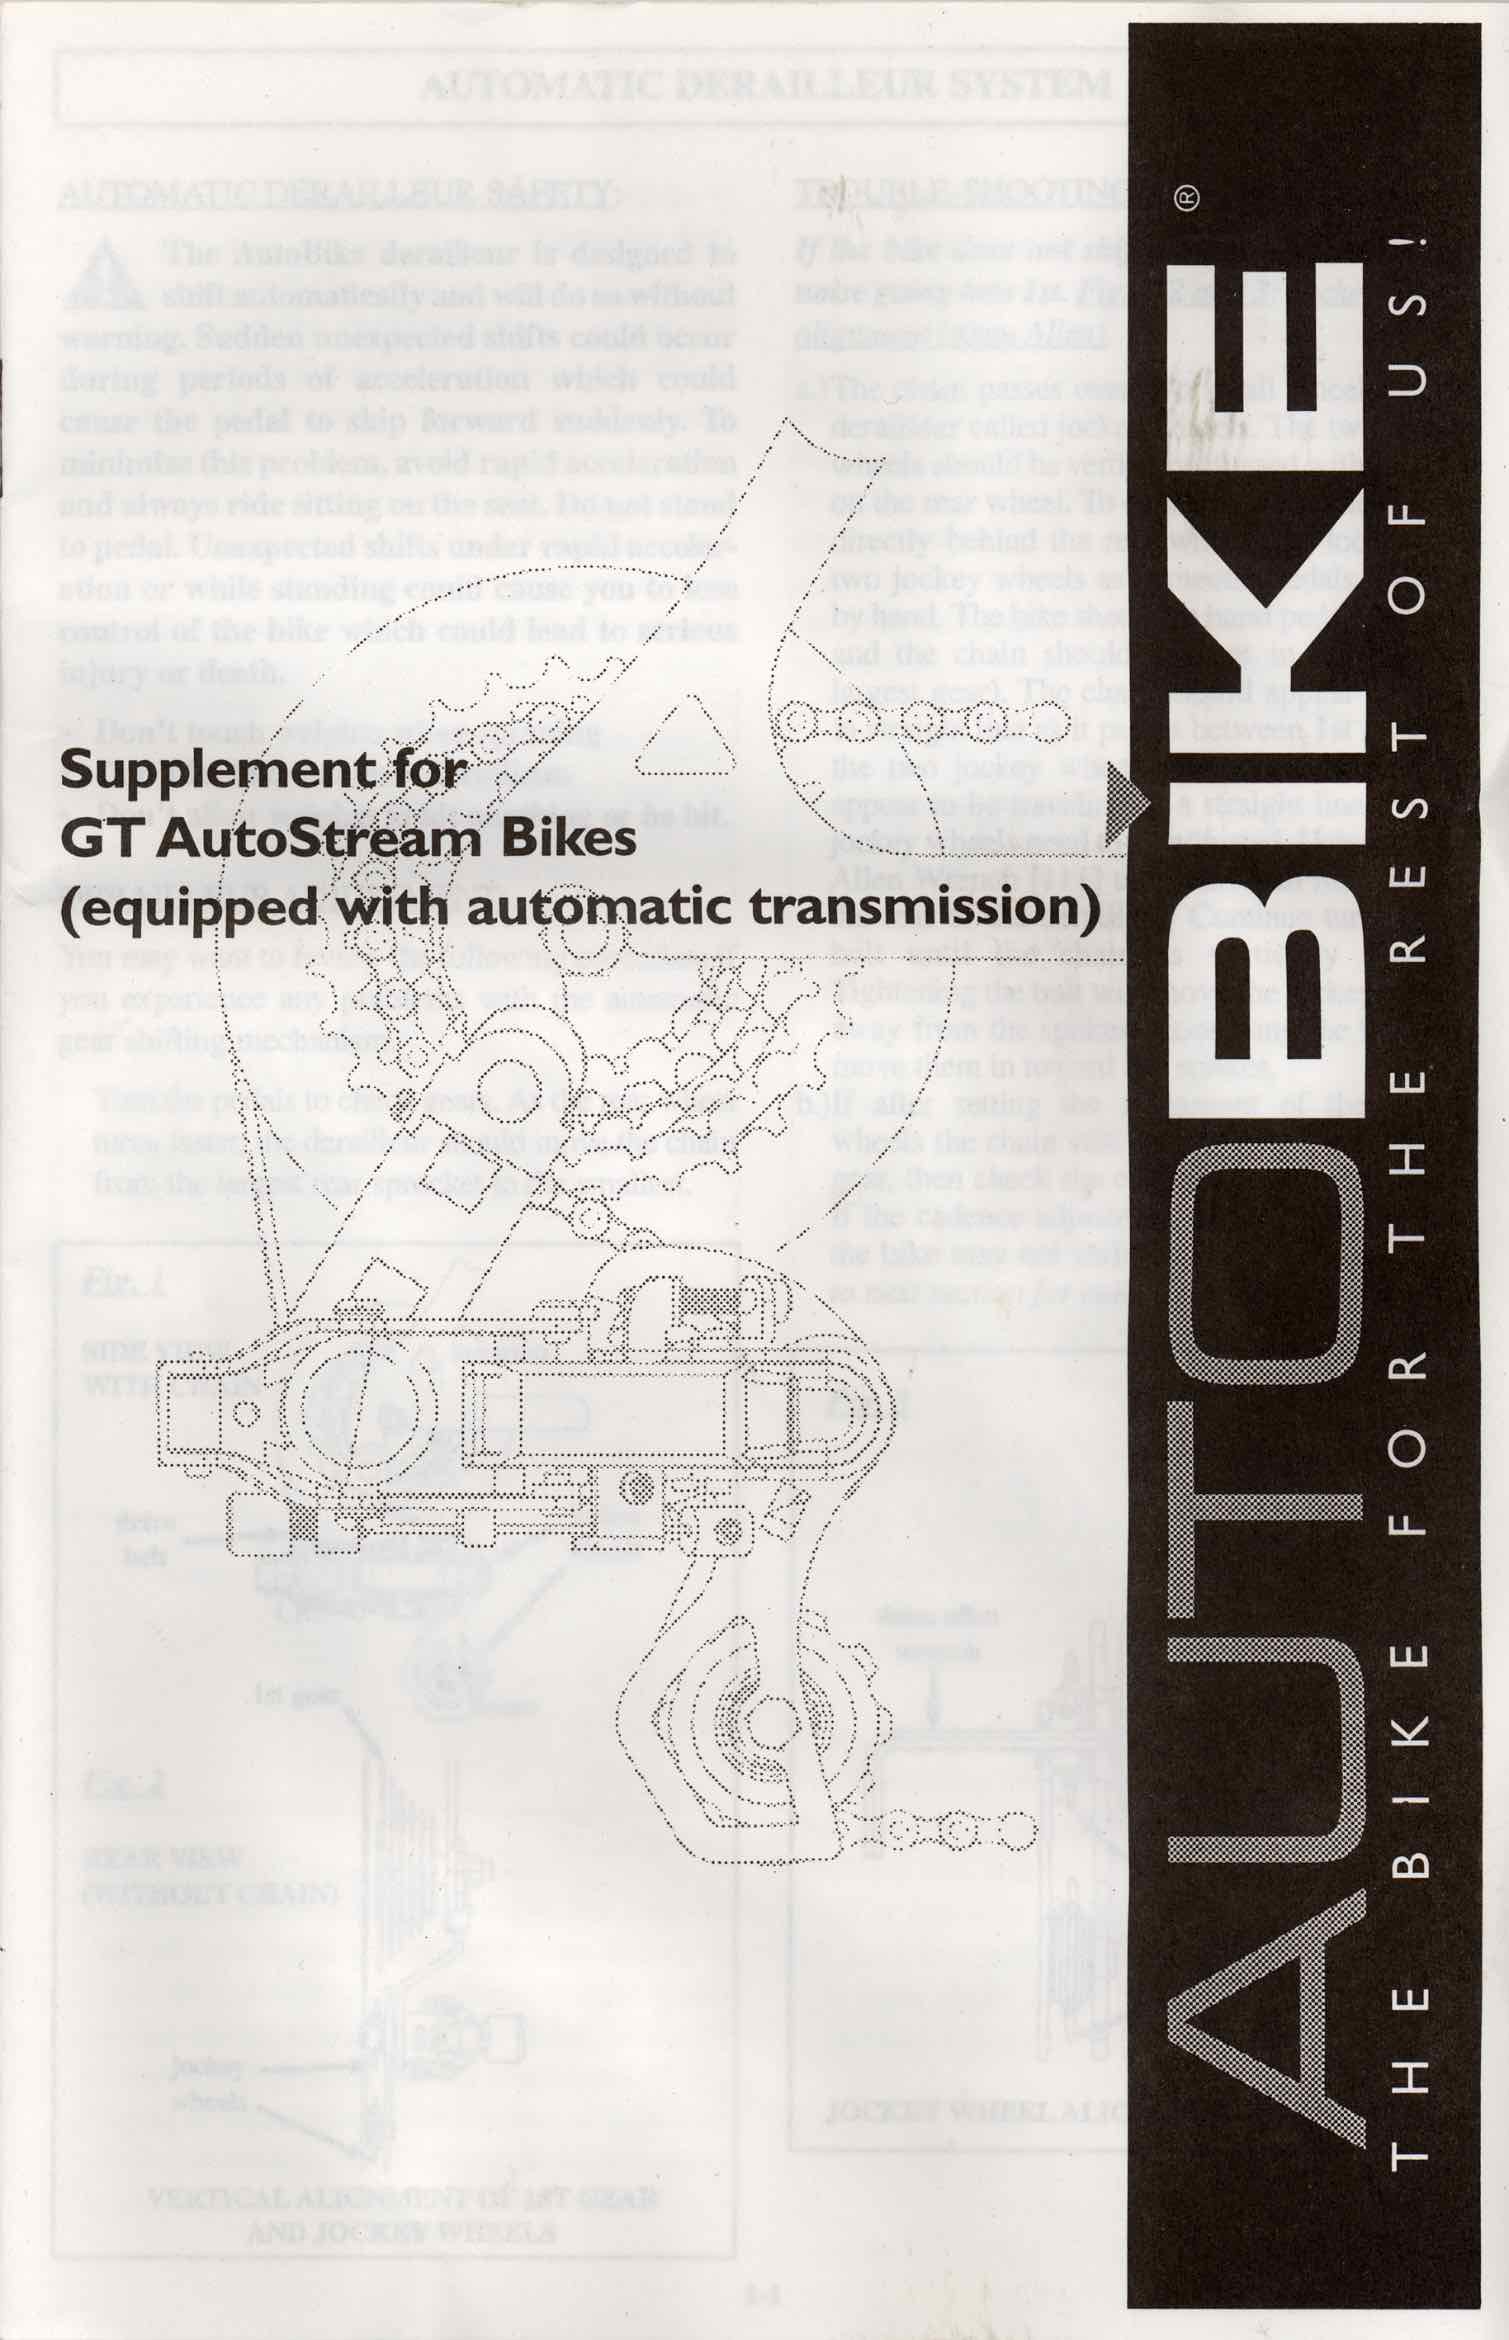 AutoBike - Supplement for GT Autostream Bikes front cover main image